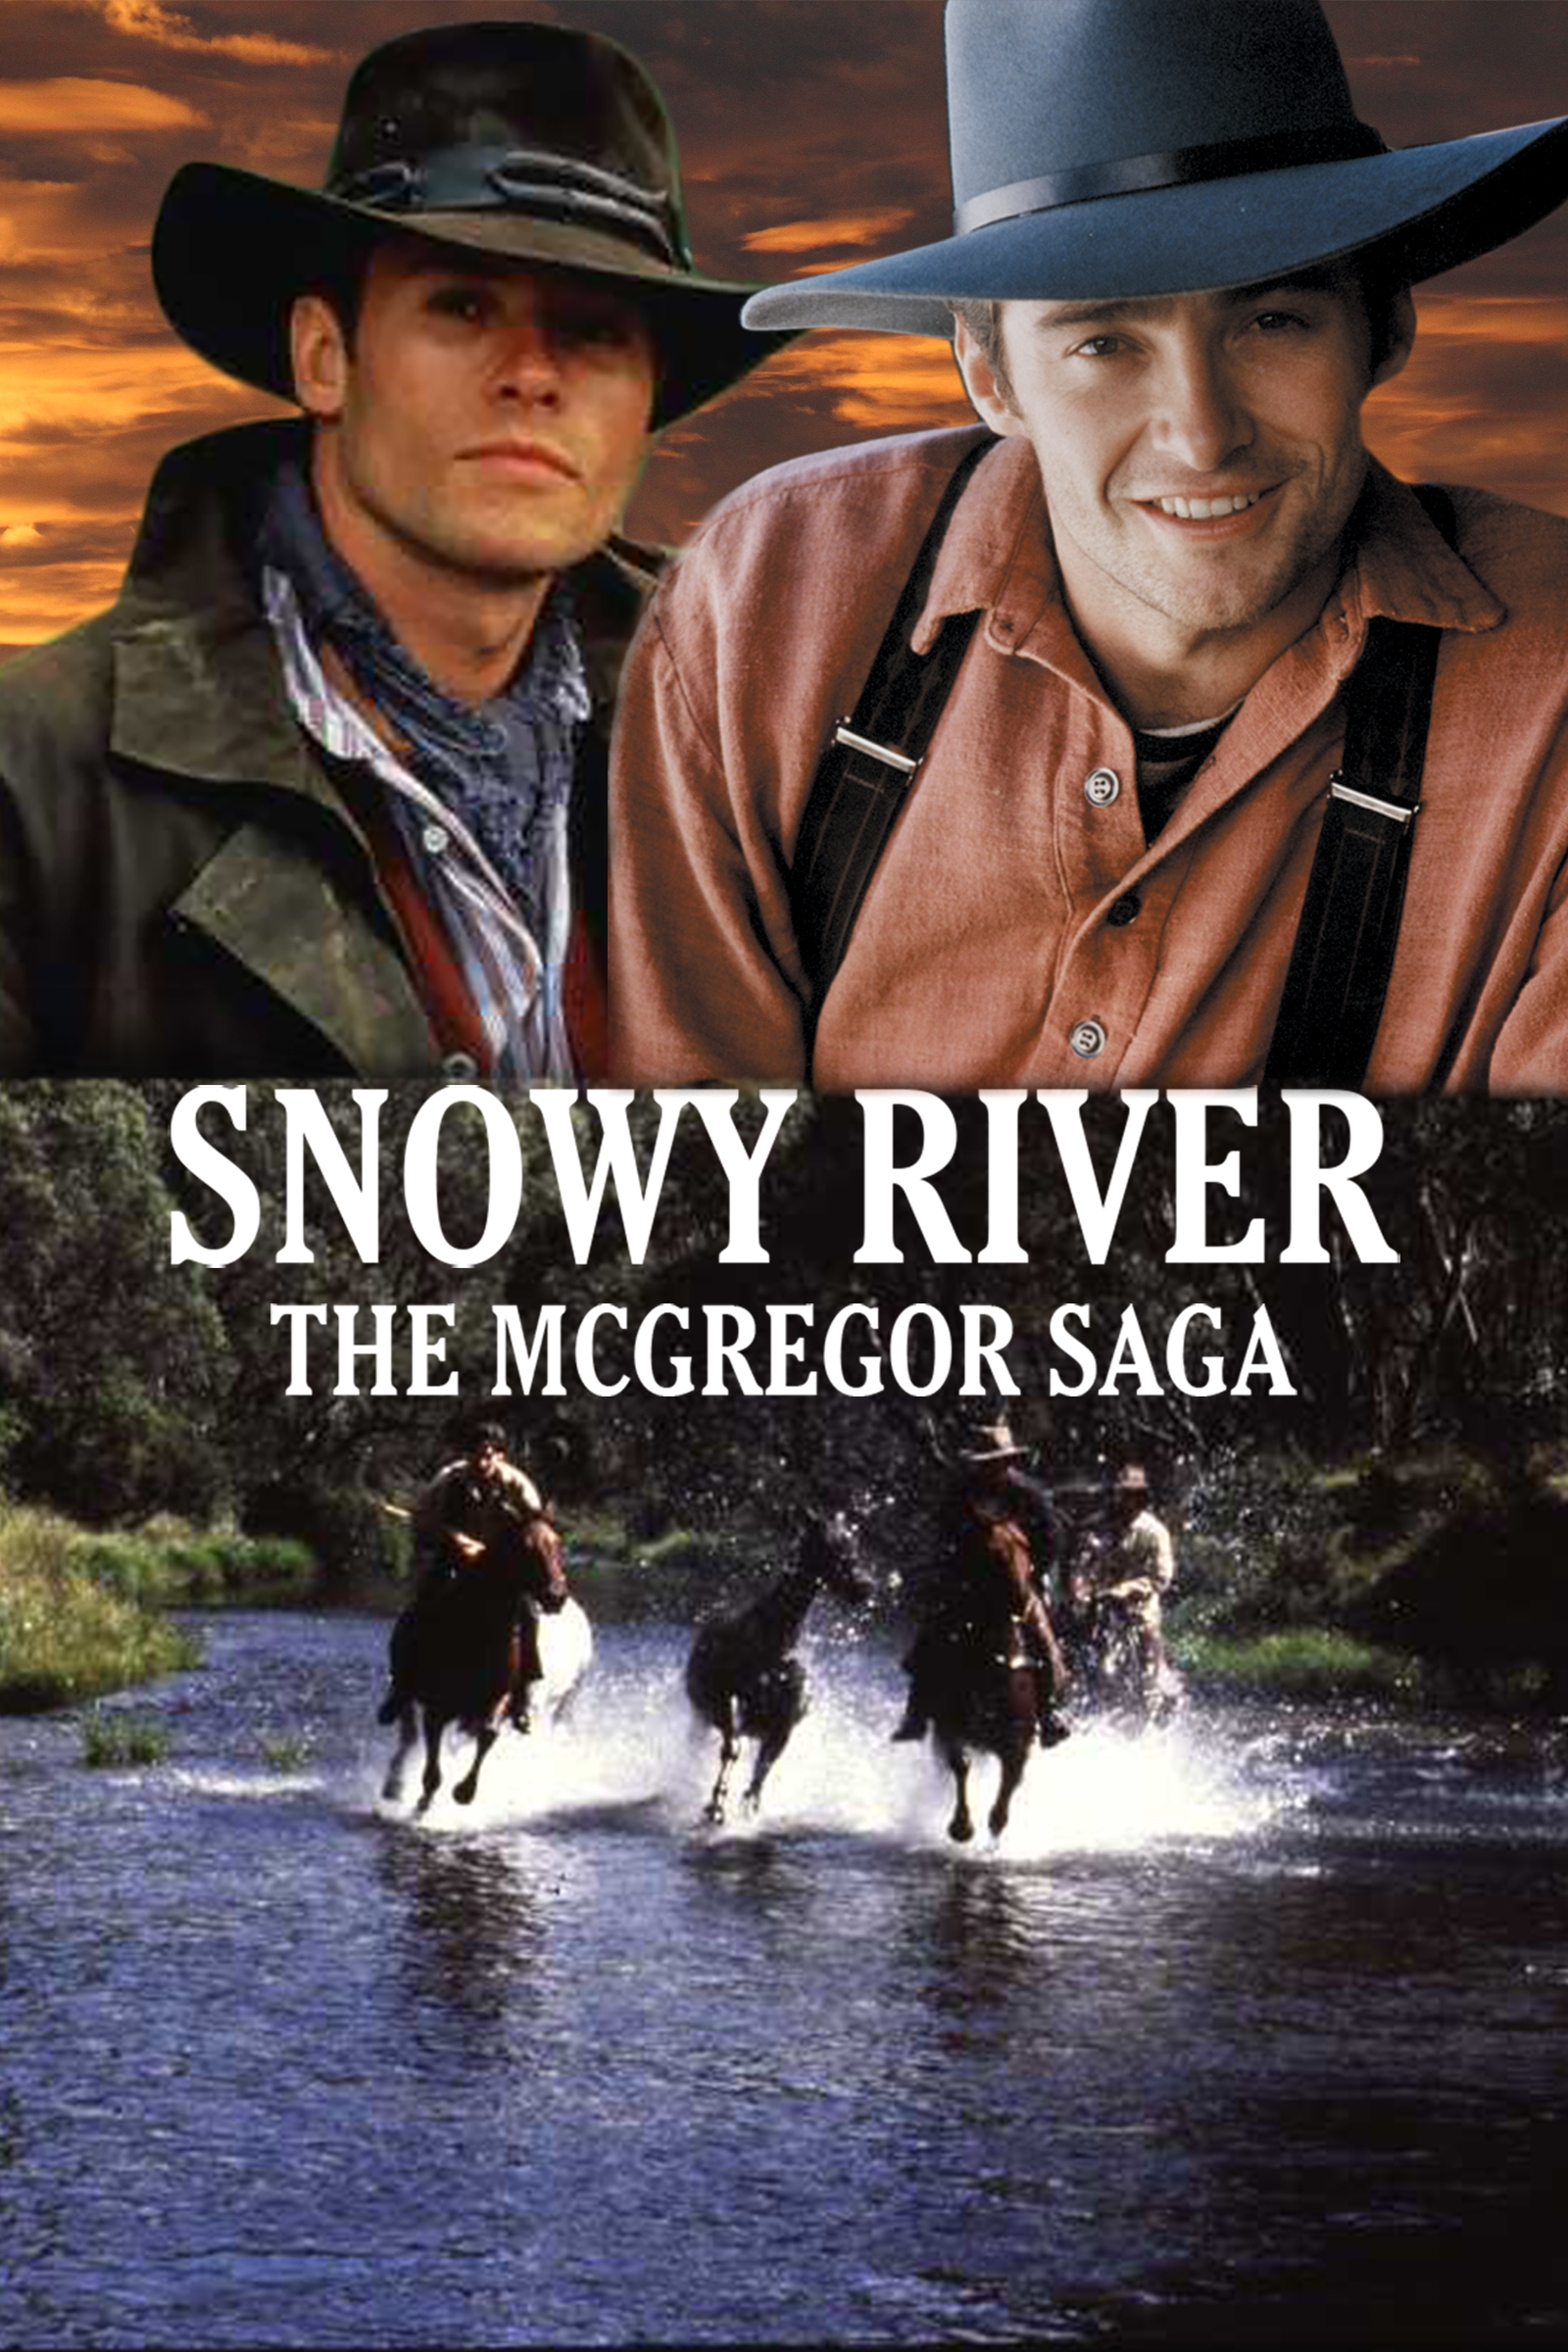 man from snowy river characters